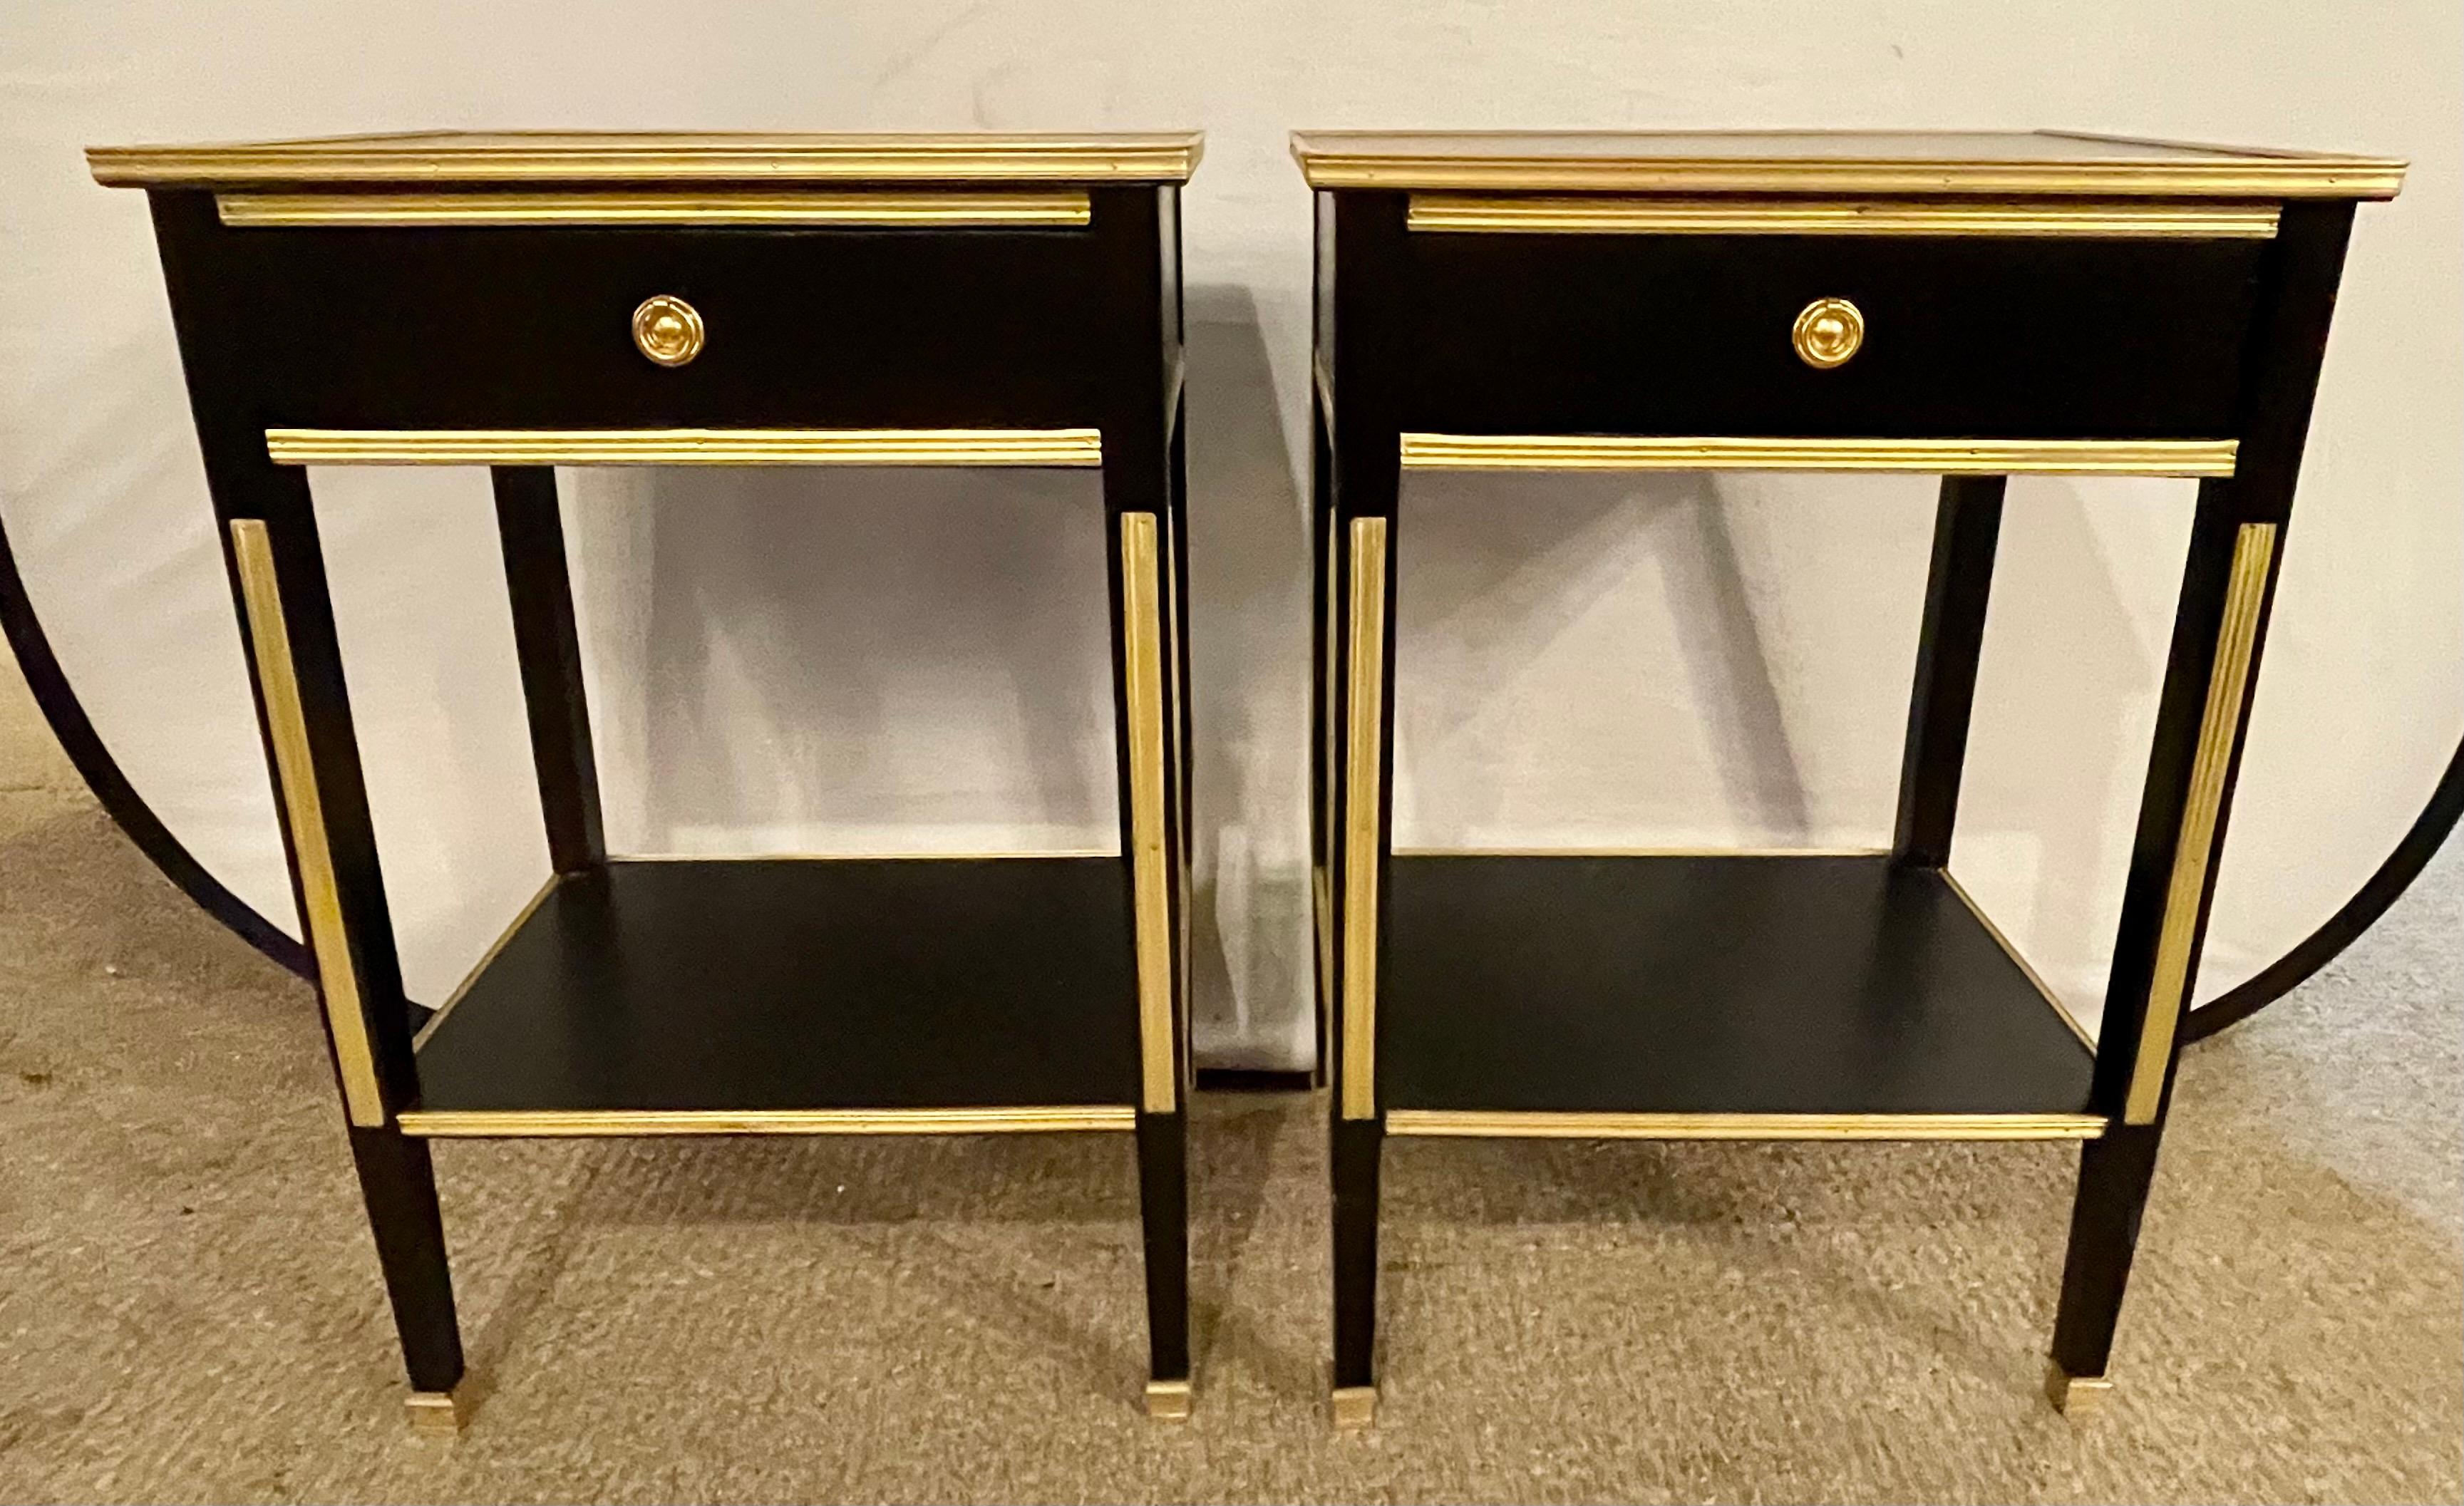 20th Century Pair of Russian Neoclassical Style Ebony Finish One Drawer Stands or End Tables